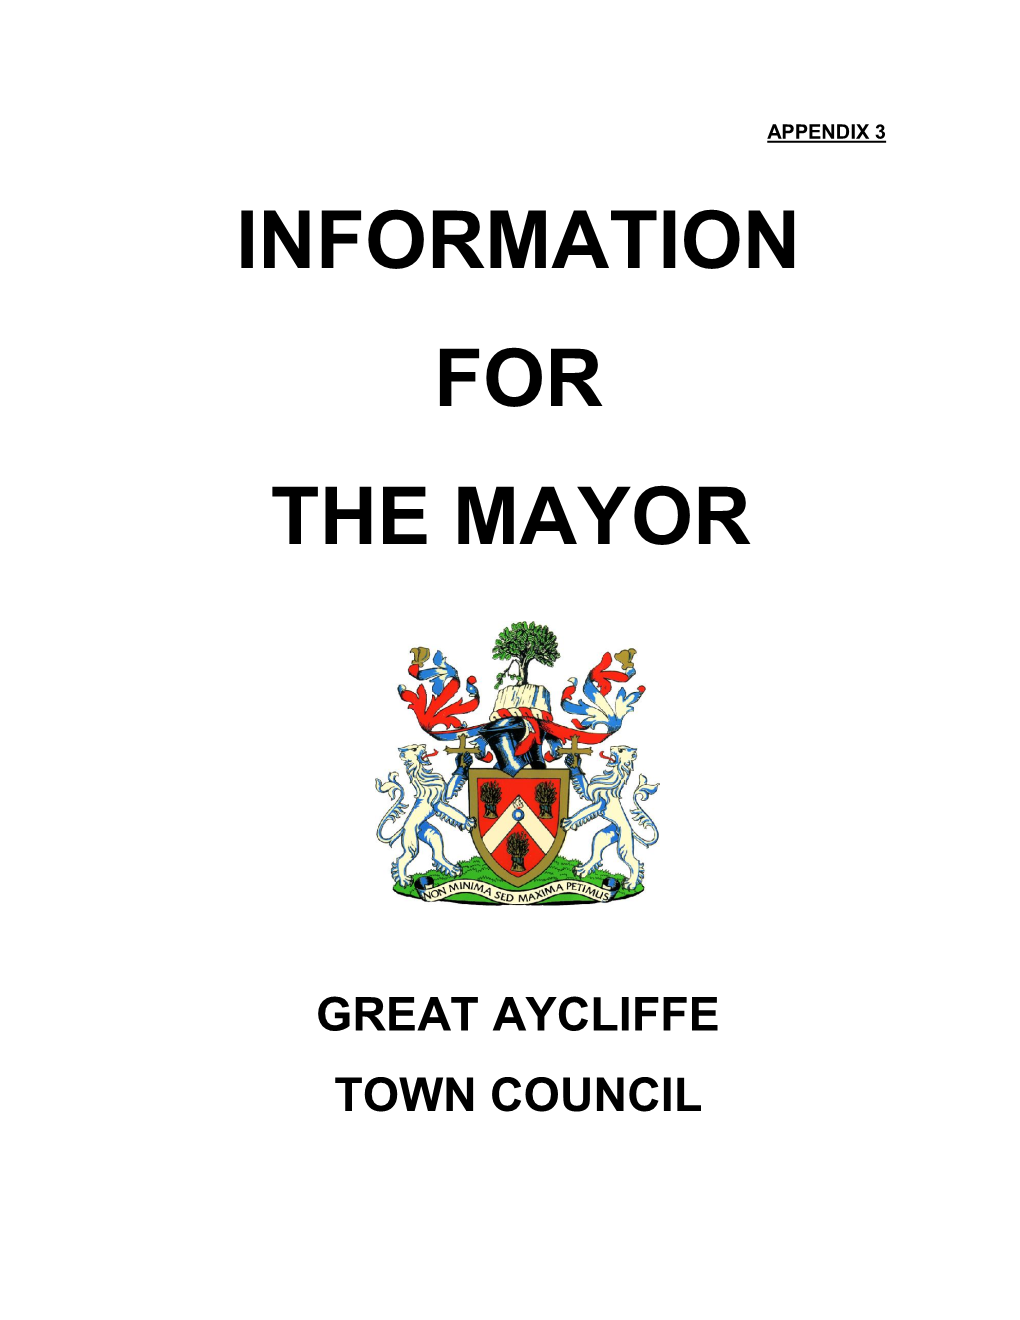 Information for the Mayor